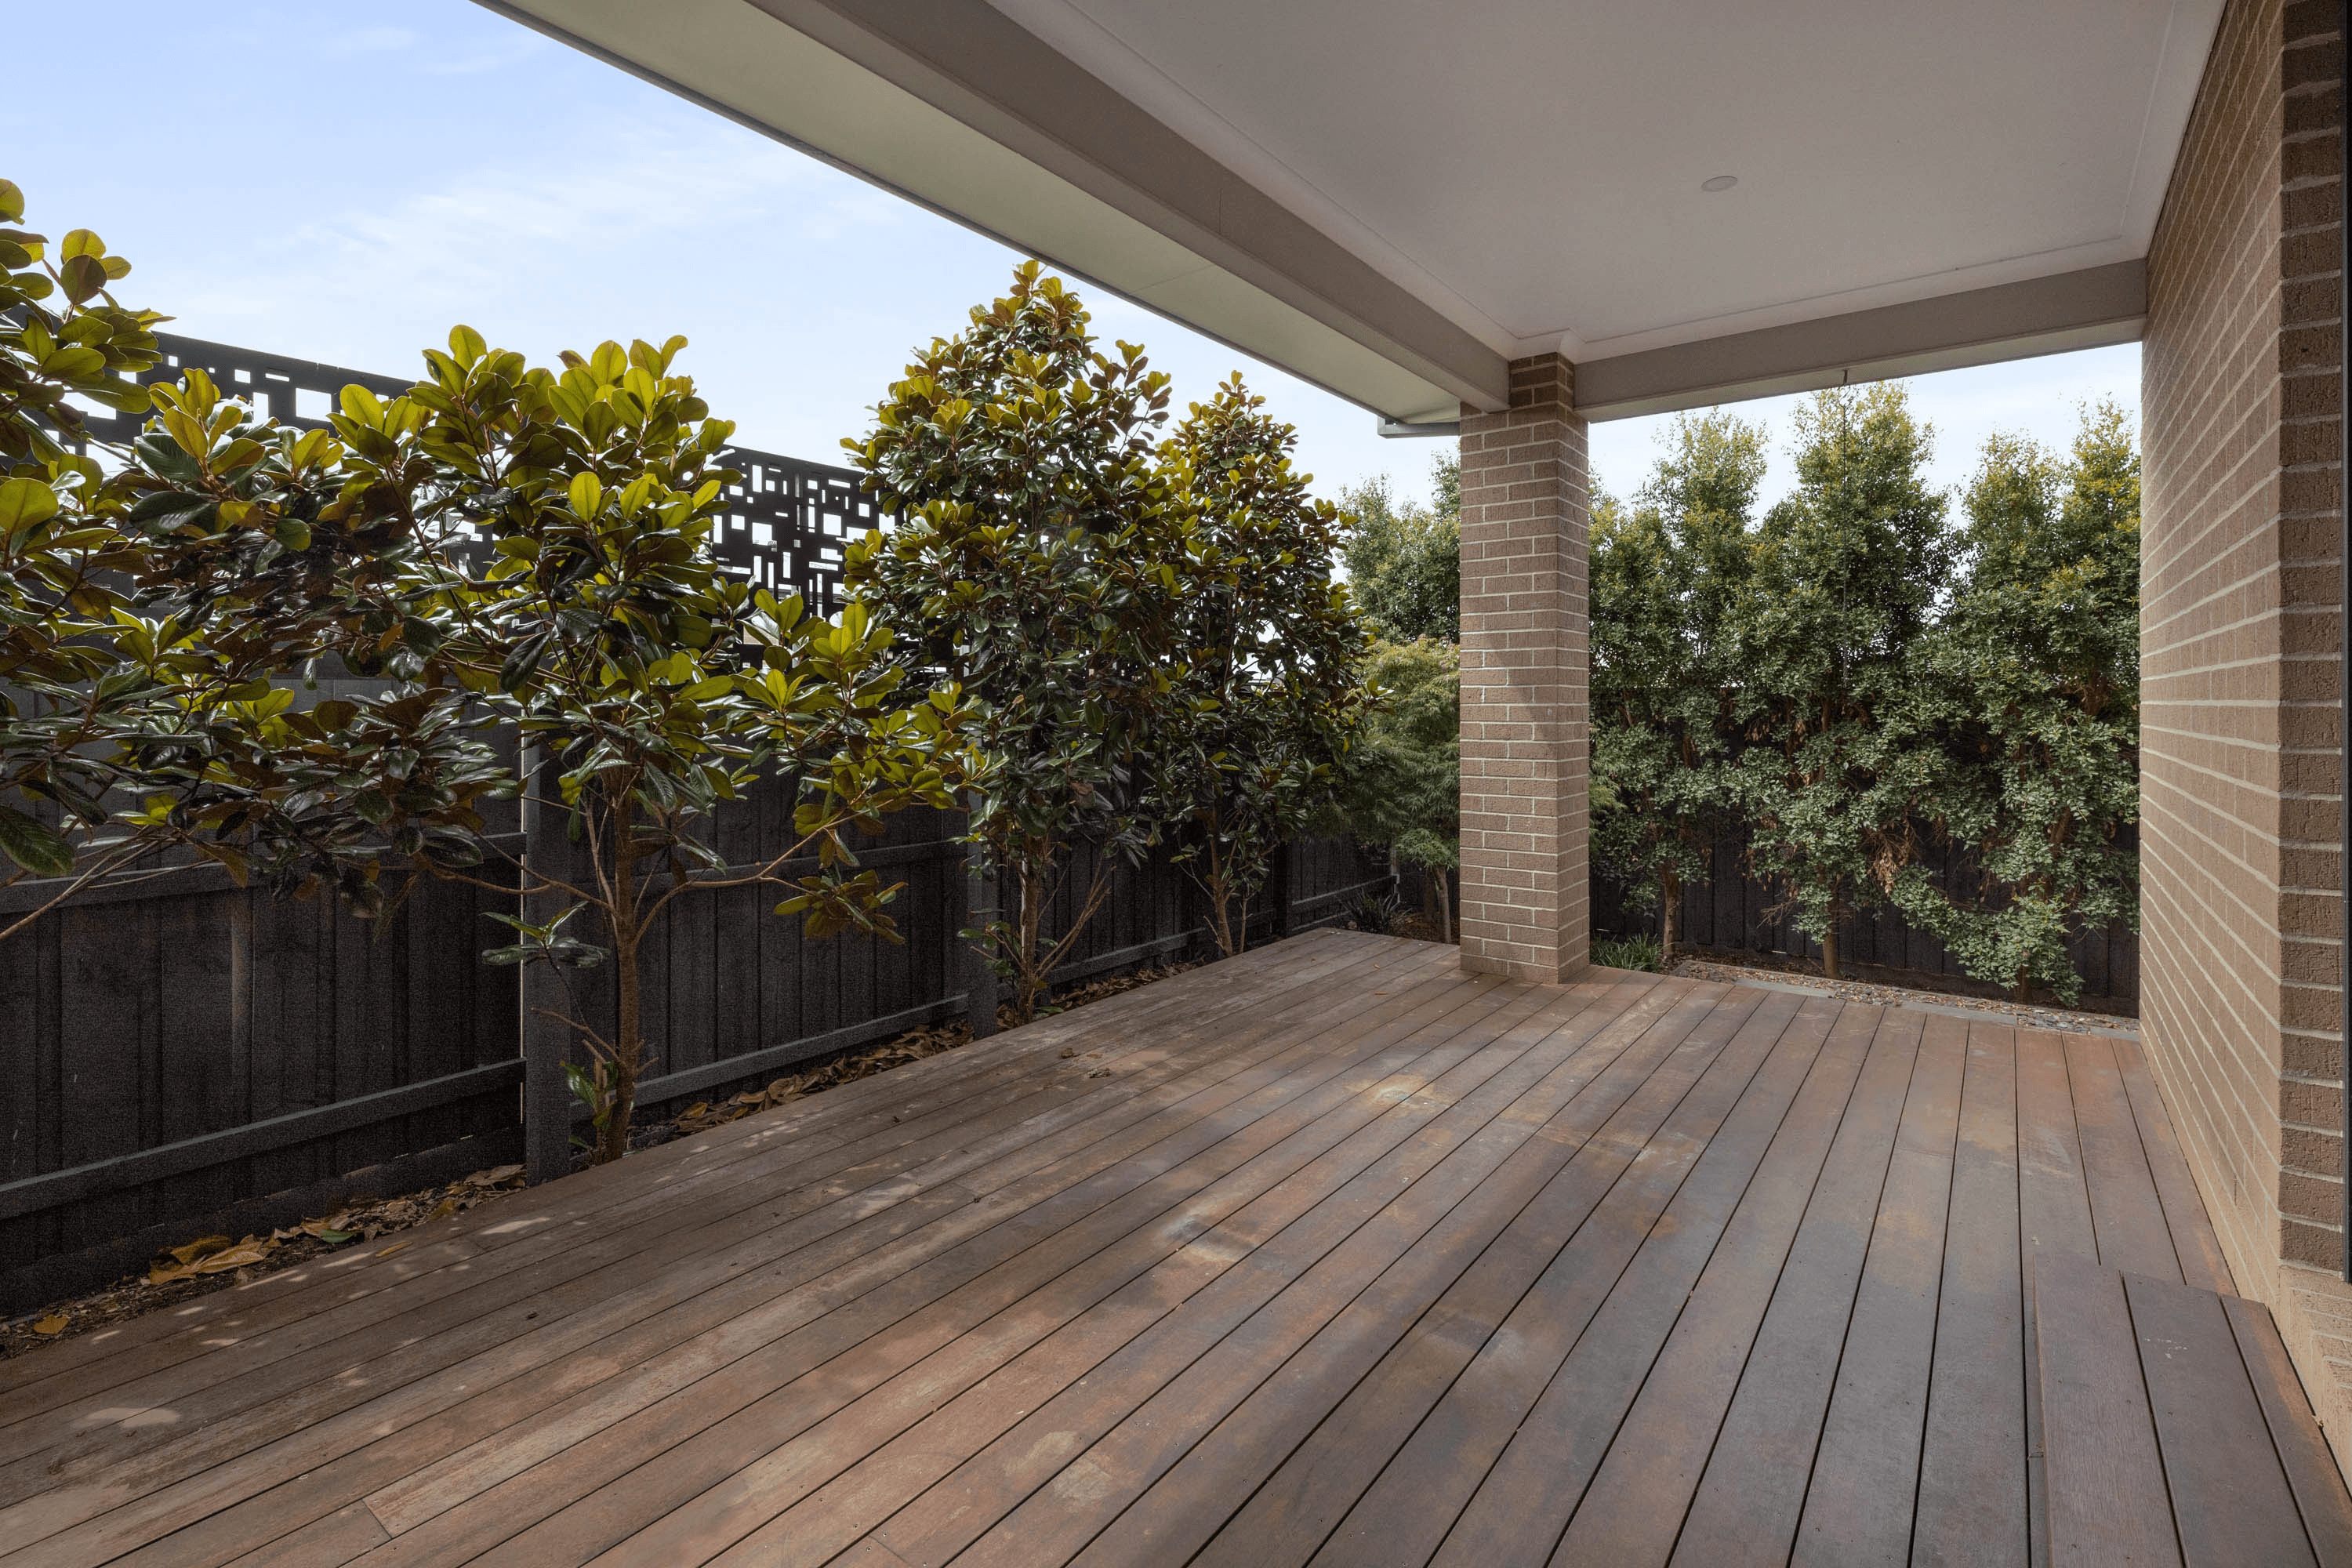 42 Waterman Drive, Clyde, VIC 3978